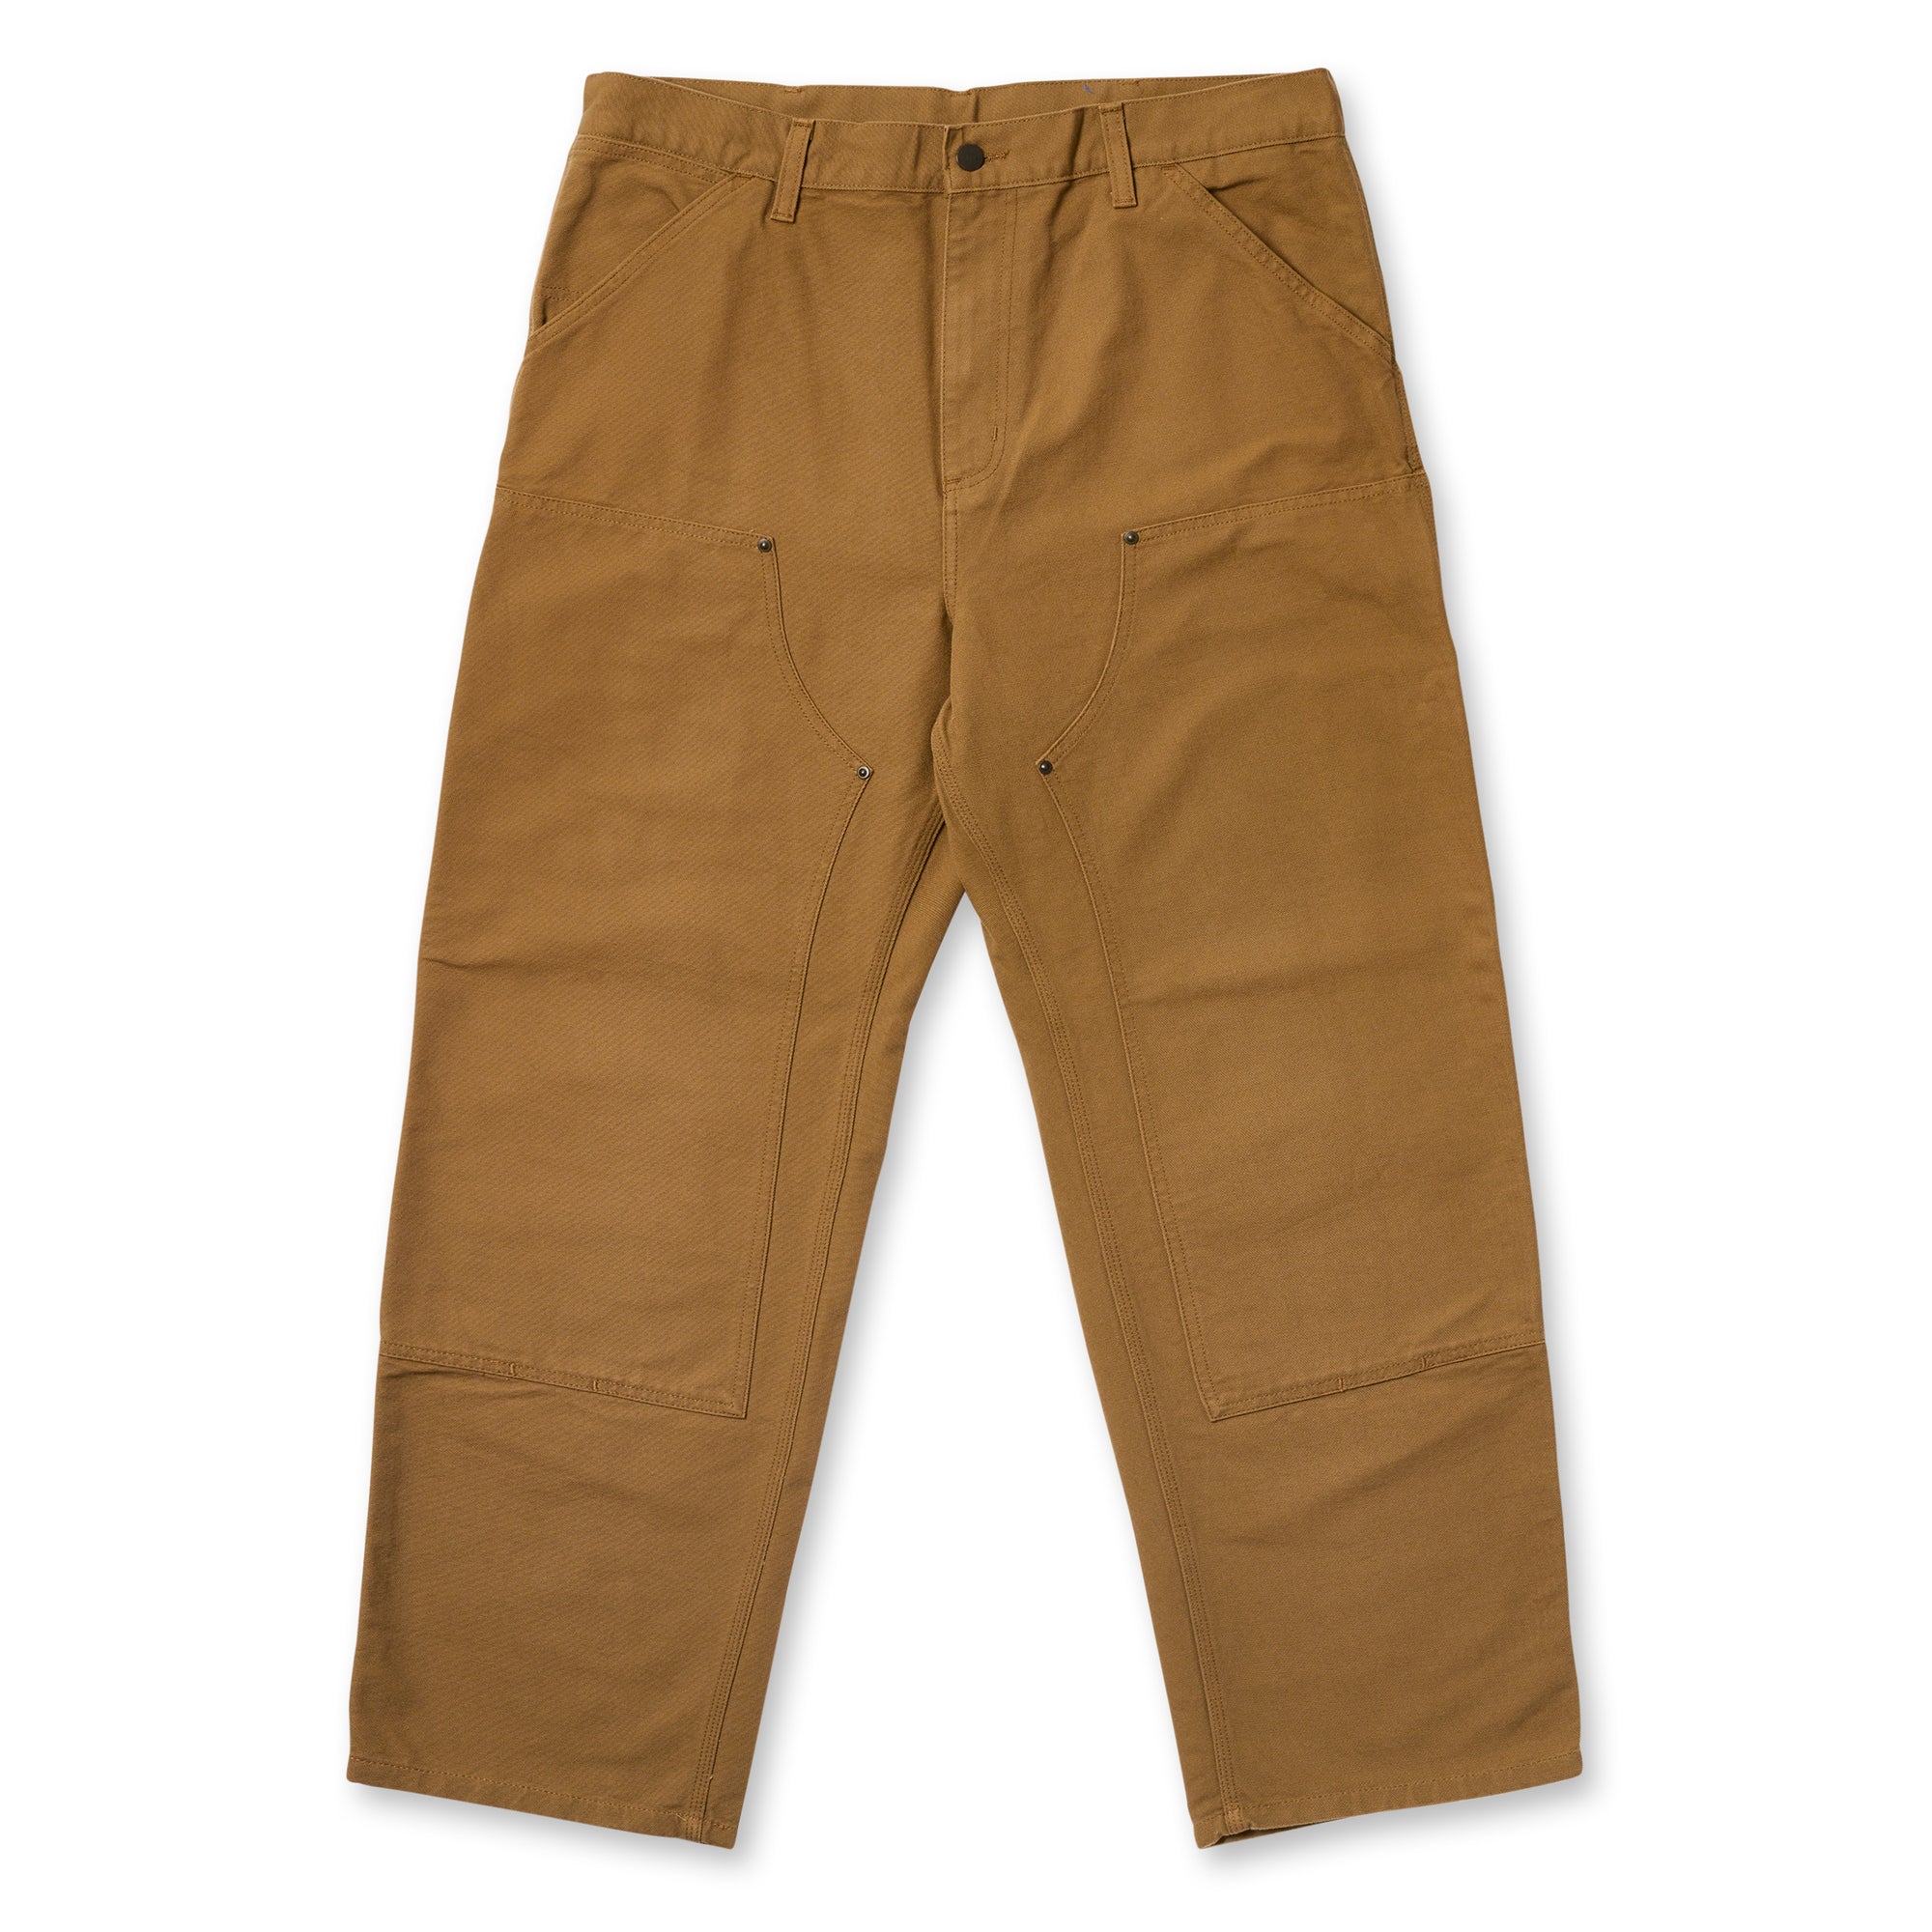 Palace - Carhartt WIP Double Knee Pant - (Hamilton Brown) view 1